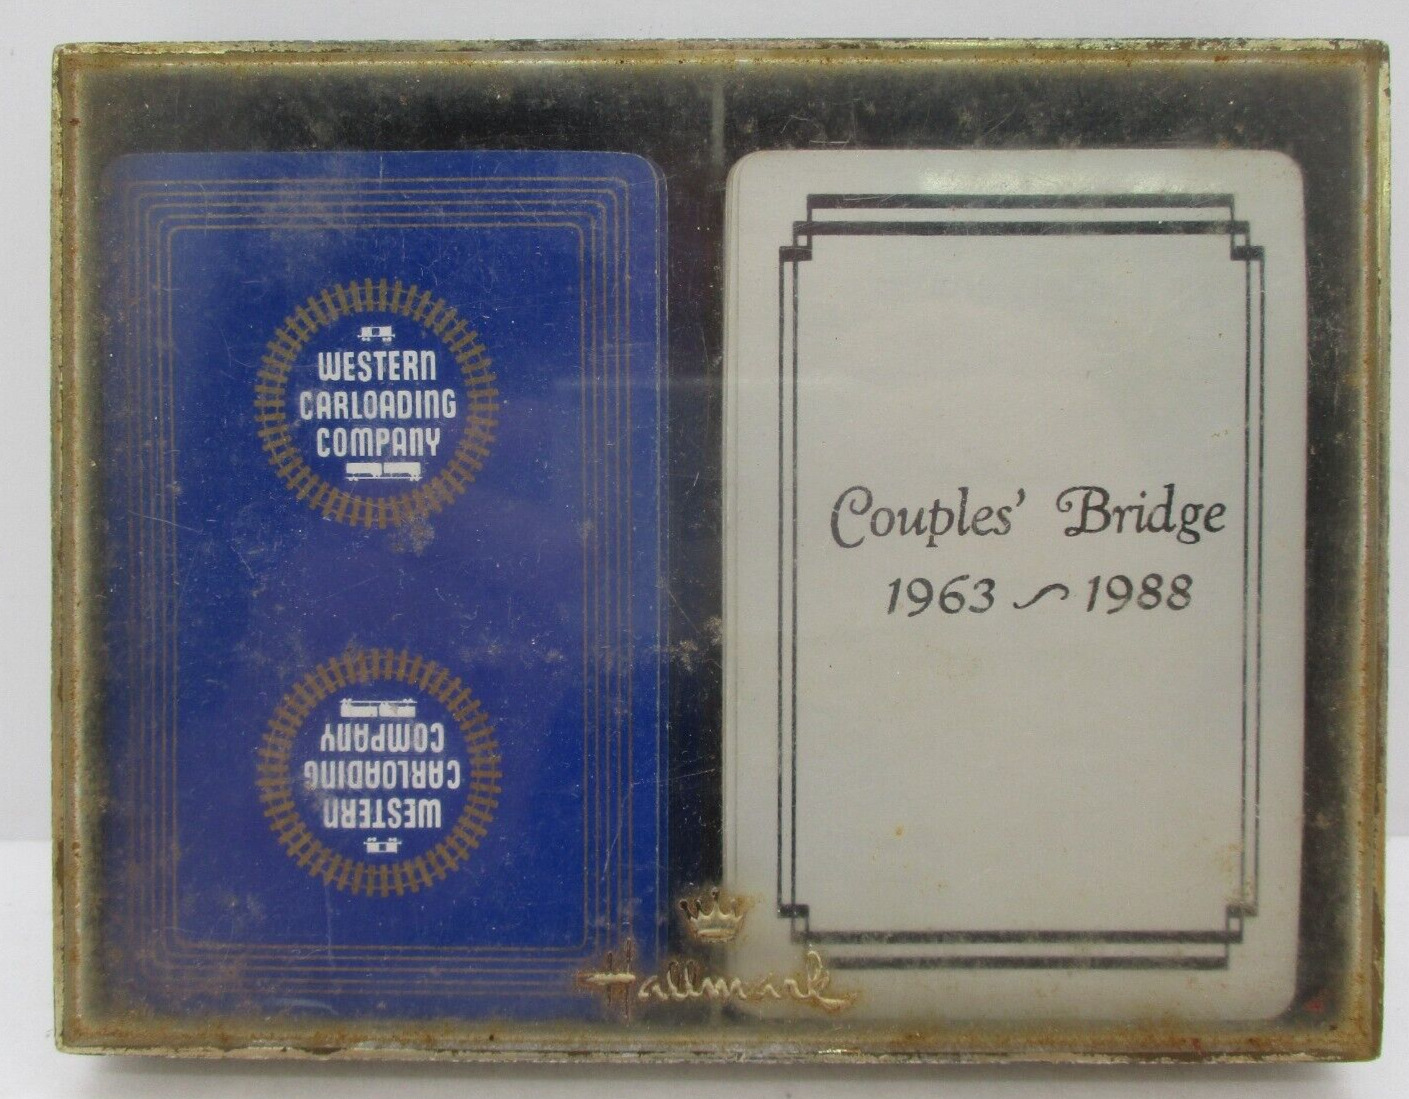 Vintage Playing Cards Western Carloading Company Couples Bridge